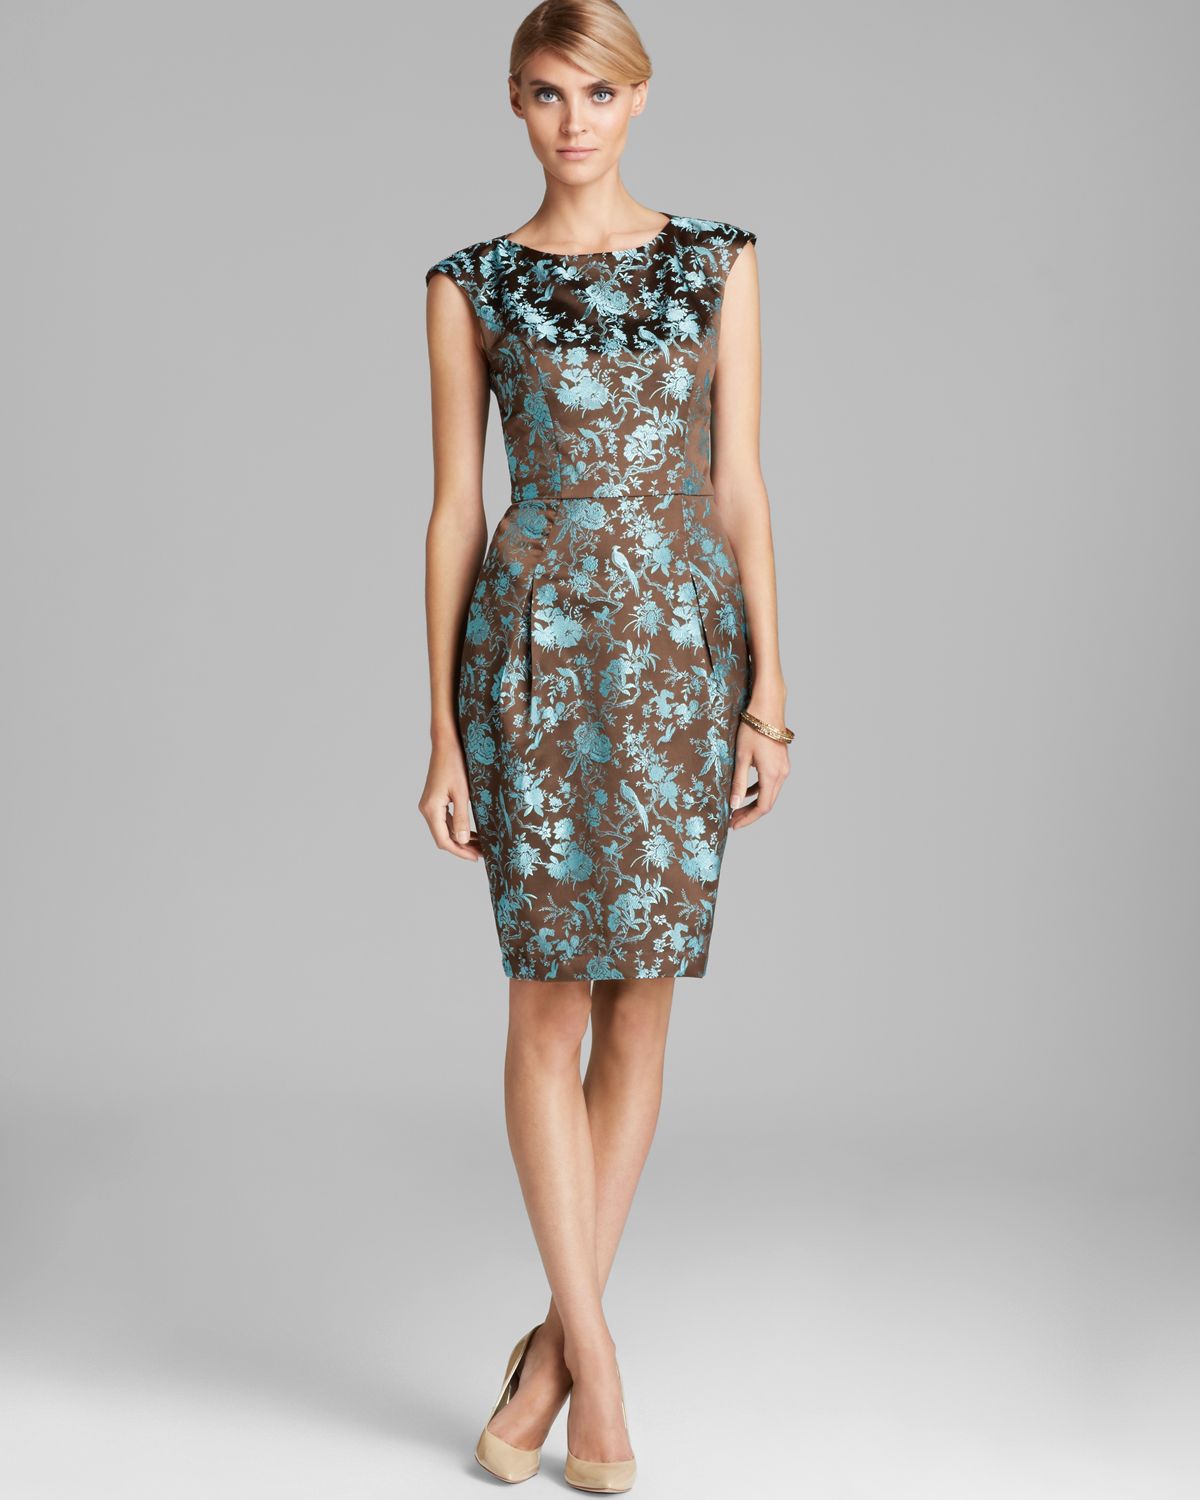 Lyst - Sue Wong Cutout Back Printed Dress in Blue